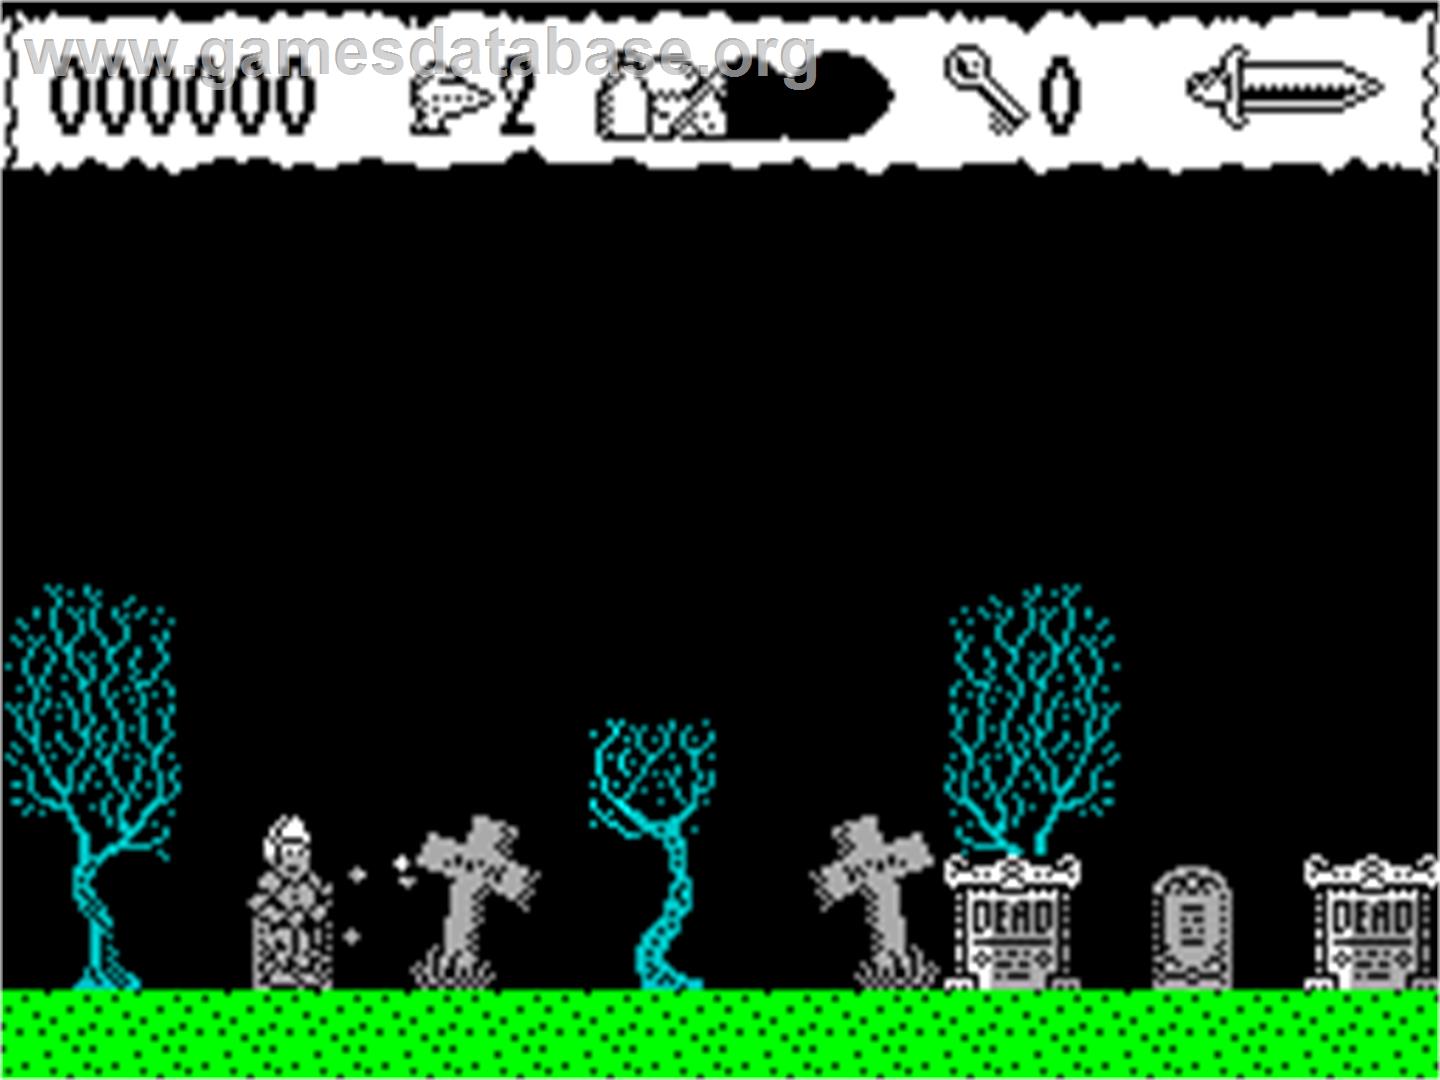 Prince Clumsy - Sinclair ZX Spectrum - Artwork - In Game